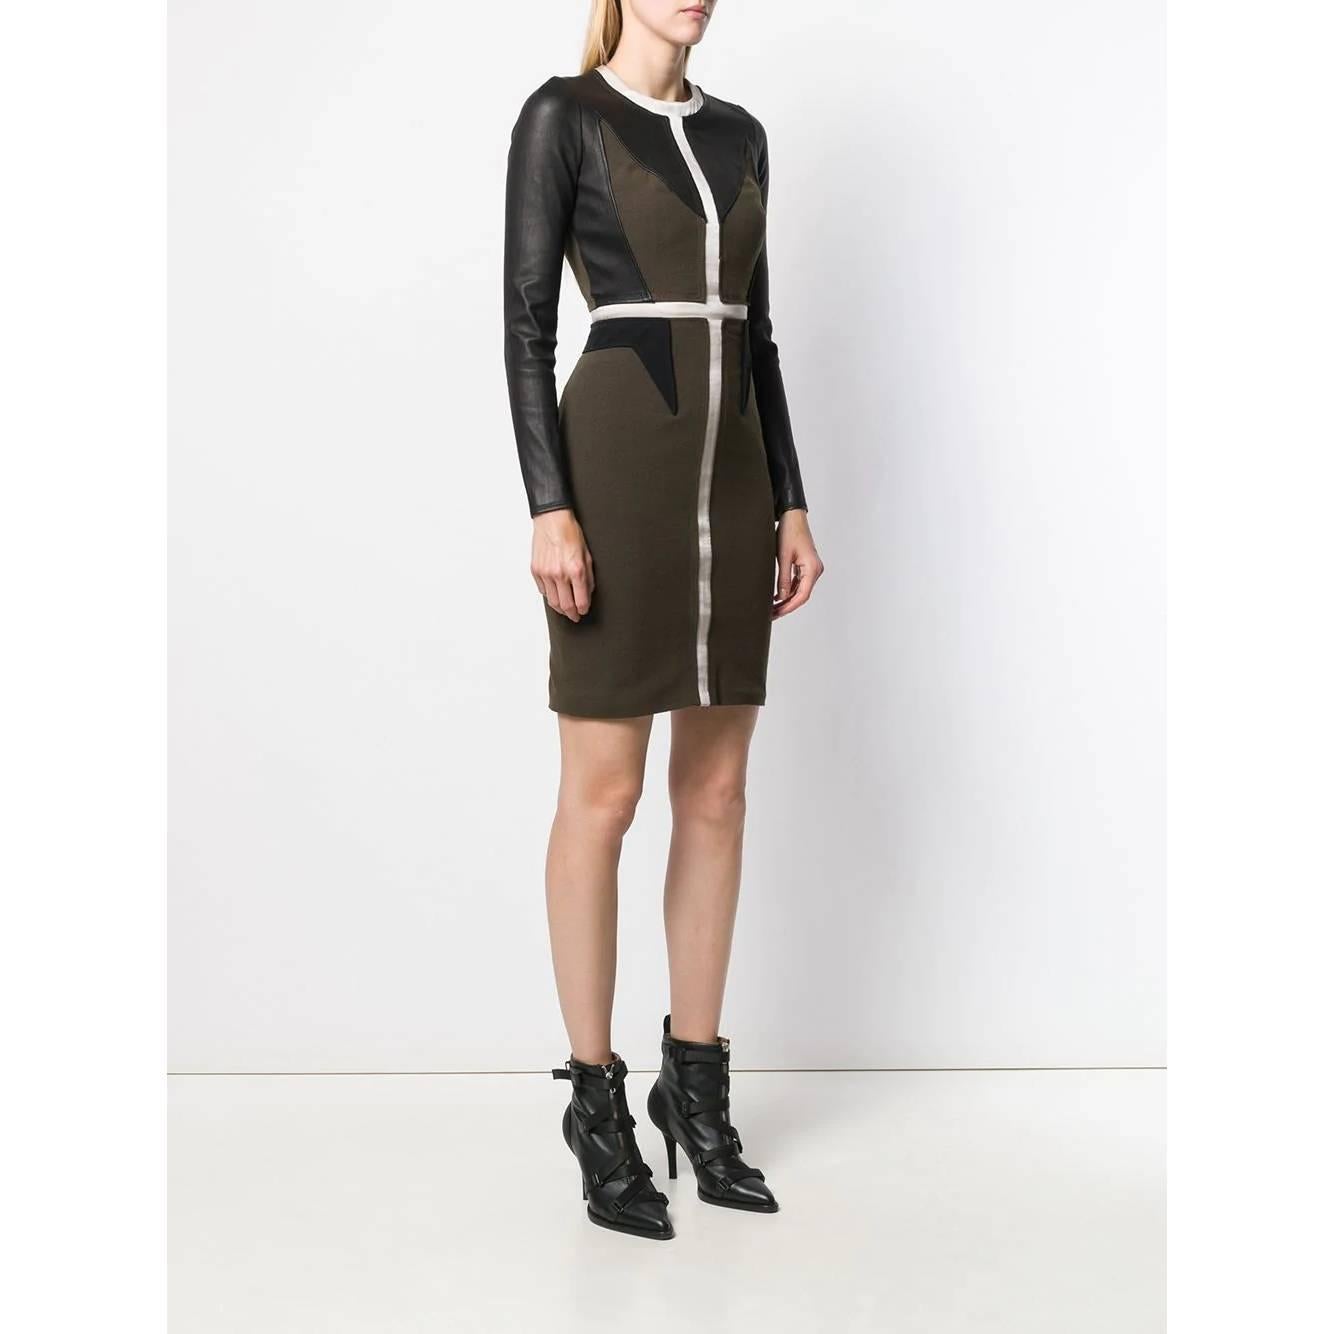 A.N.G.E.L.O. Vintage - ITALY
Givenchy wool blend dress. Crewneck model, geometric details in shades of black, dark green and ivory, long leather sleeves, back zip closure.

The product has slight signs of wear on the leather as shown in the